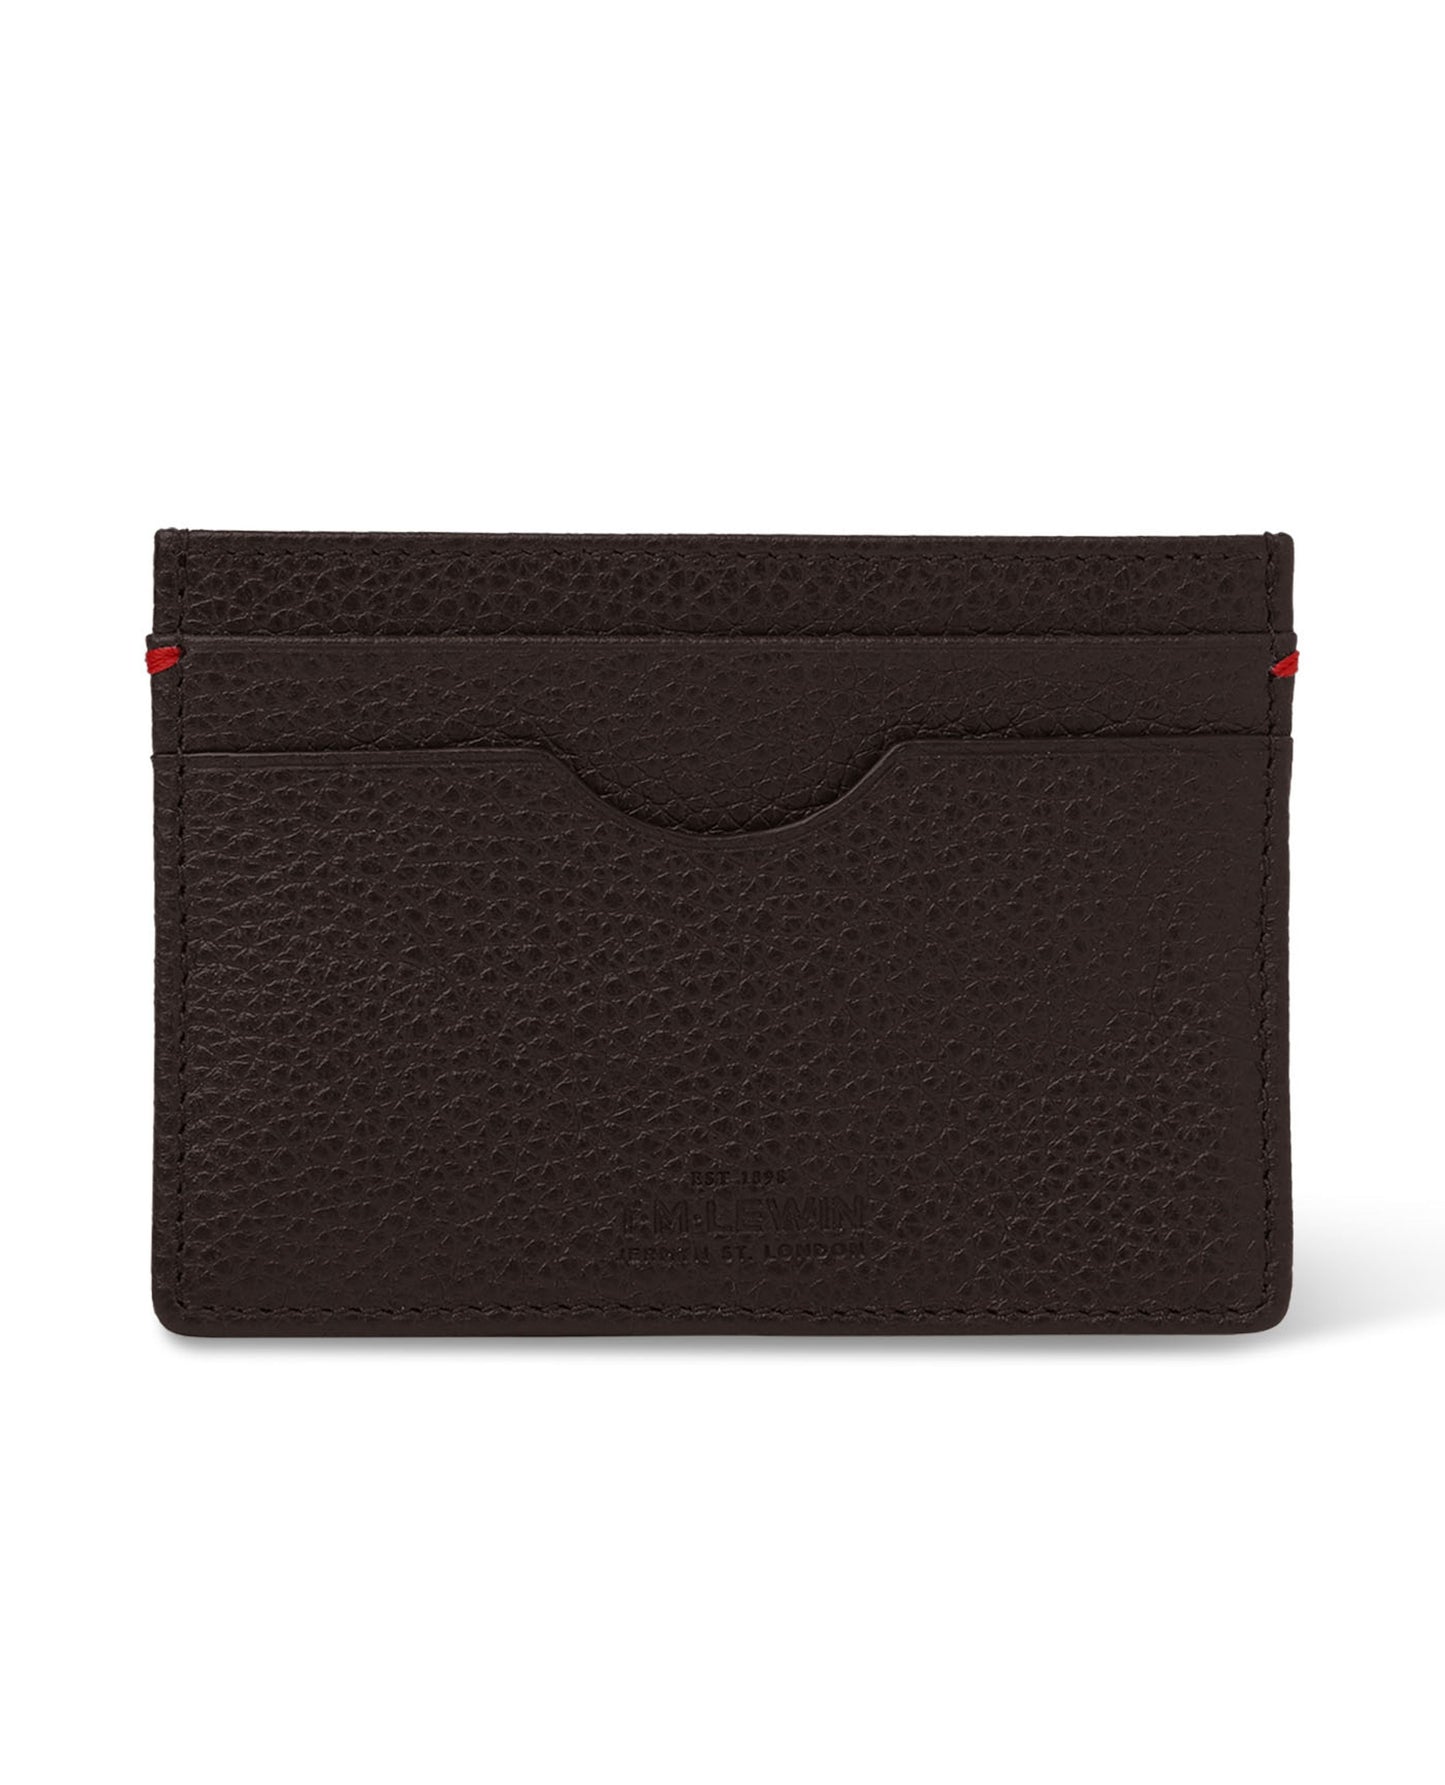 Image 1 of Leather Cardholder Brown